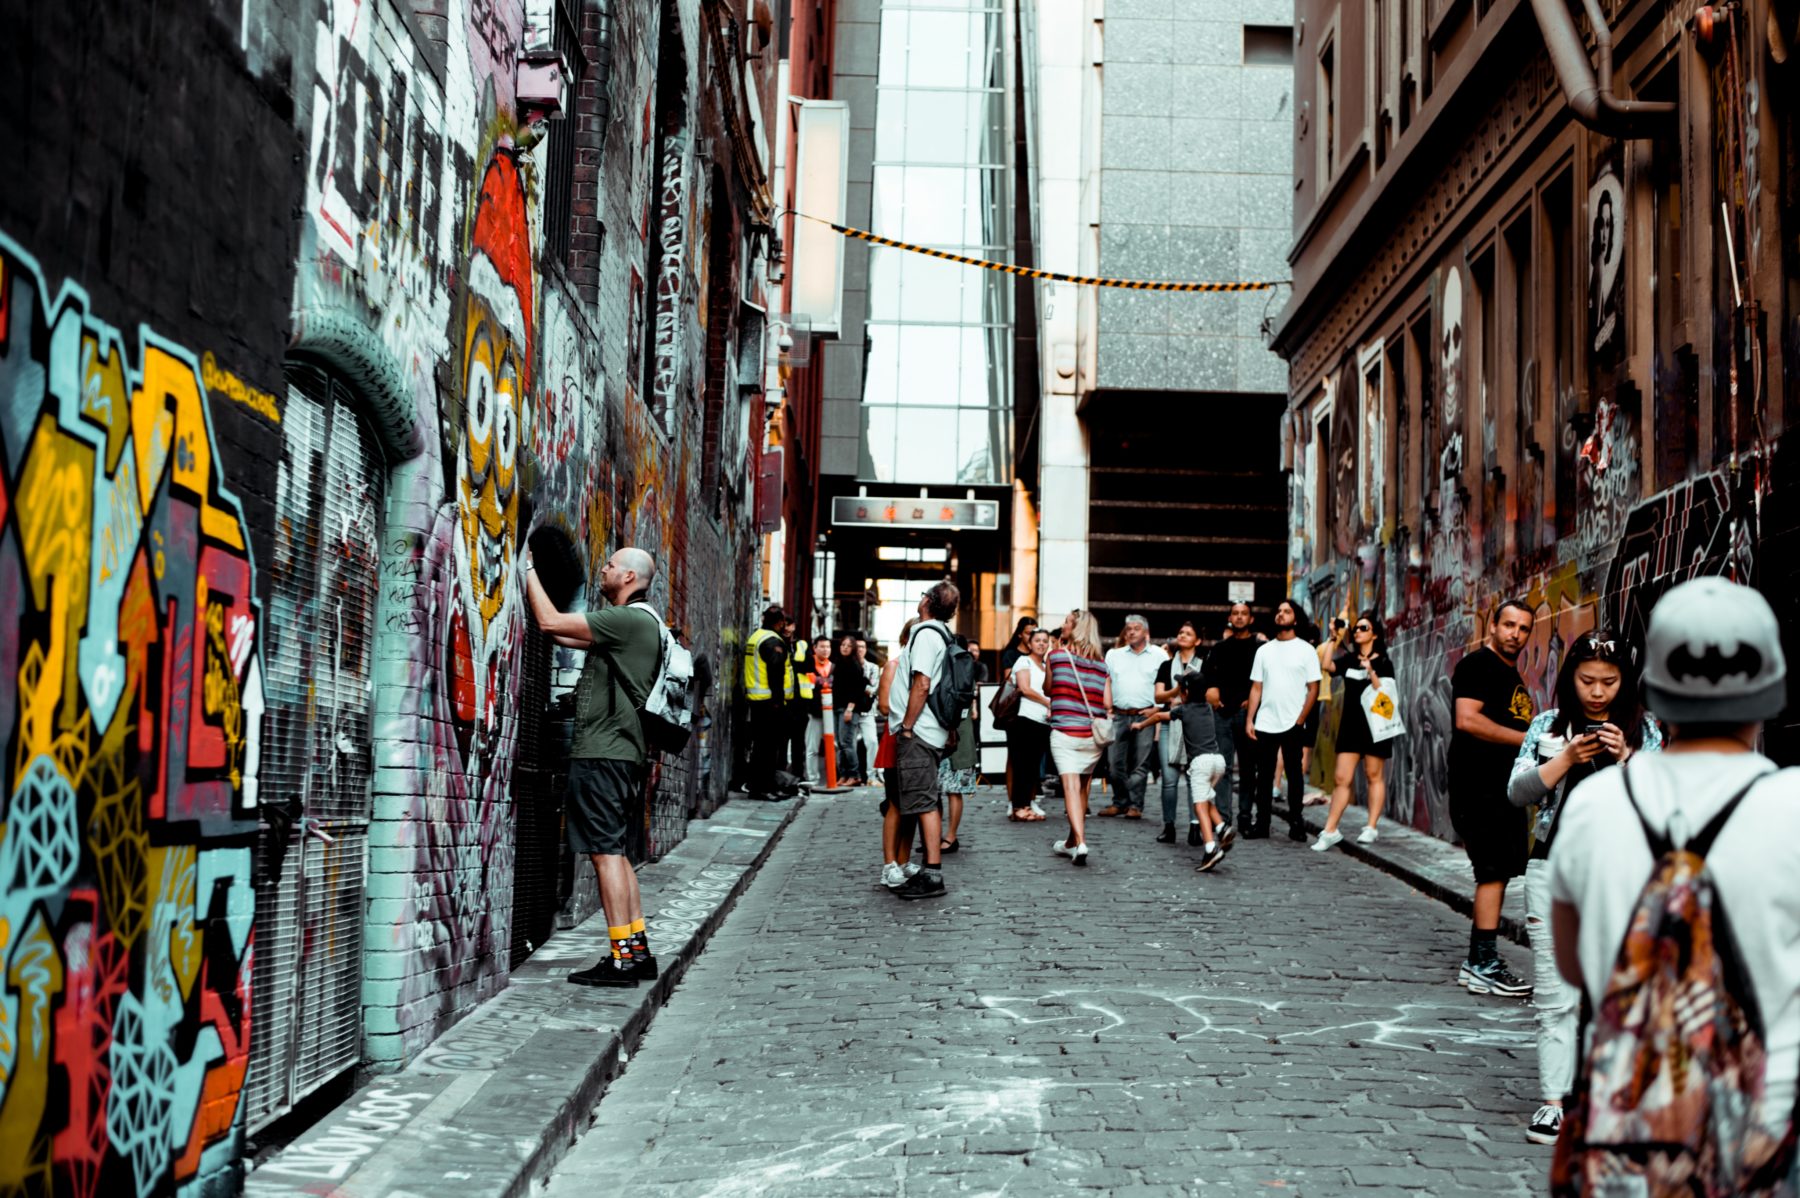 Tourists looking at street art in Melbourne, Australia.